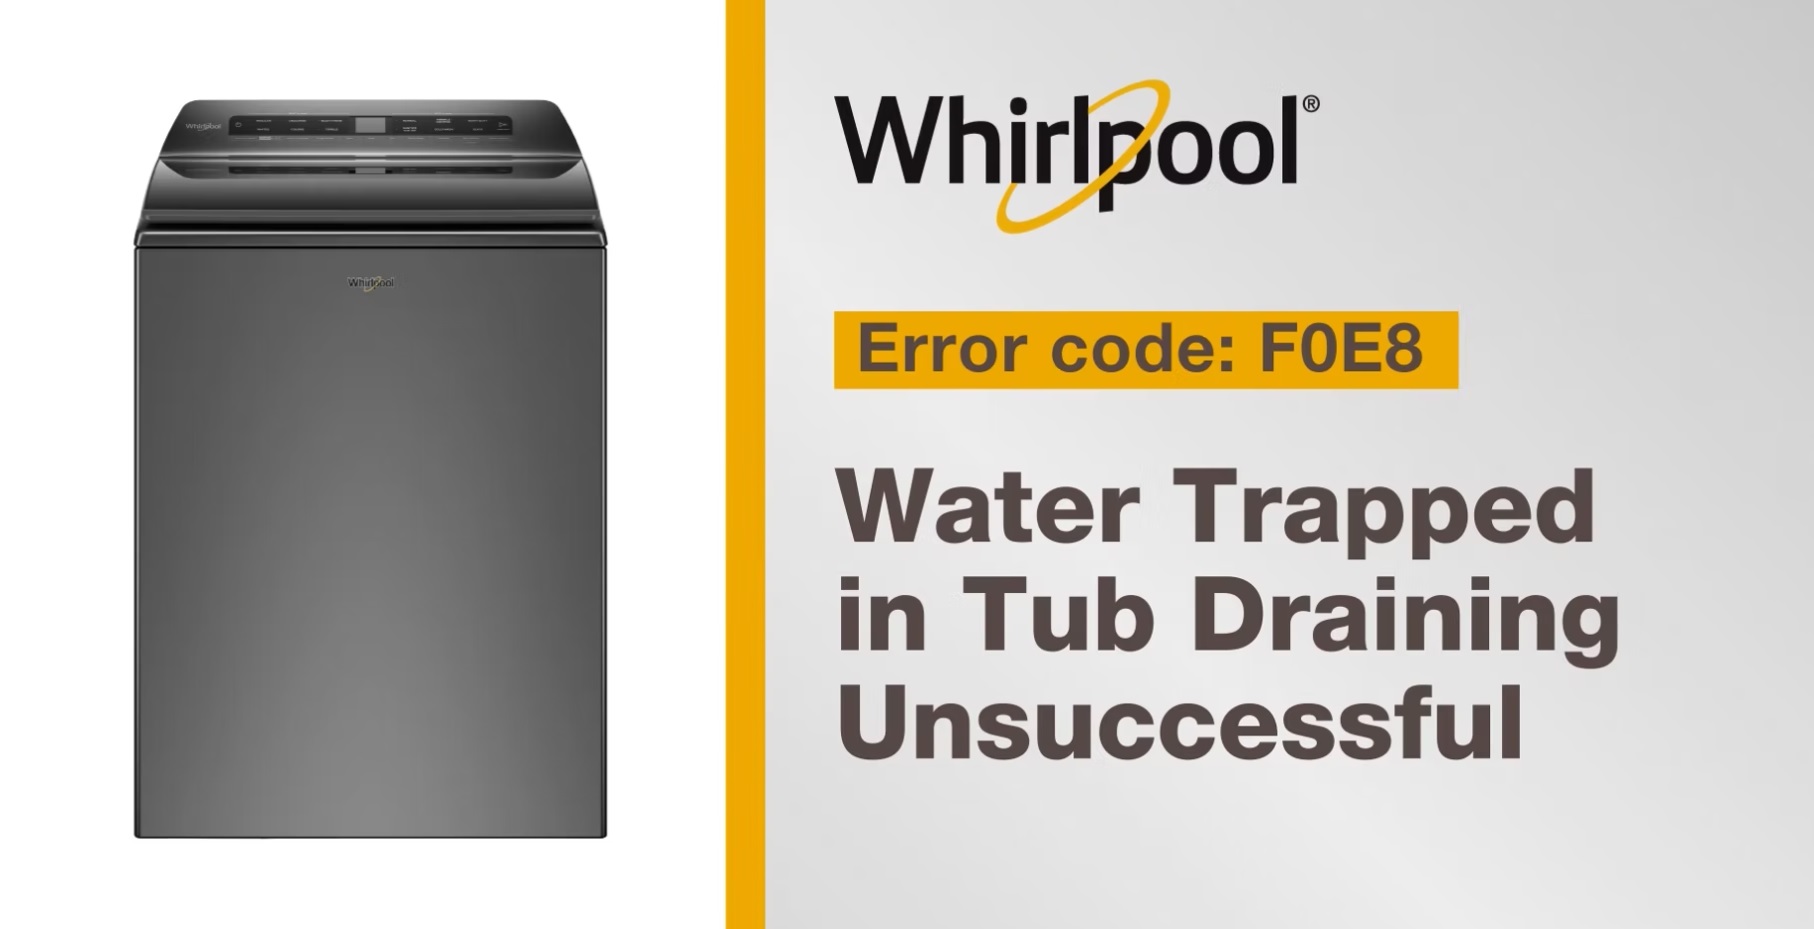 Follow these simple steps to resolve Error Code F0E8 on your Whirlpool Brand® washer. This video will assist you if you are experiencing water trapped in the tub or if draining if unsuccessful. If you need further assistance call for service at 1-866-333-4591.